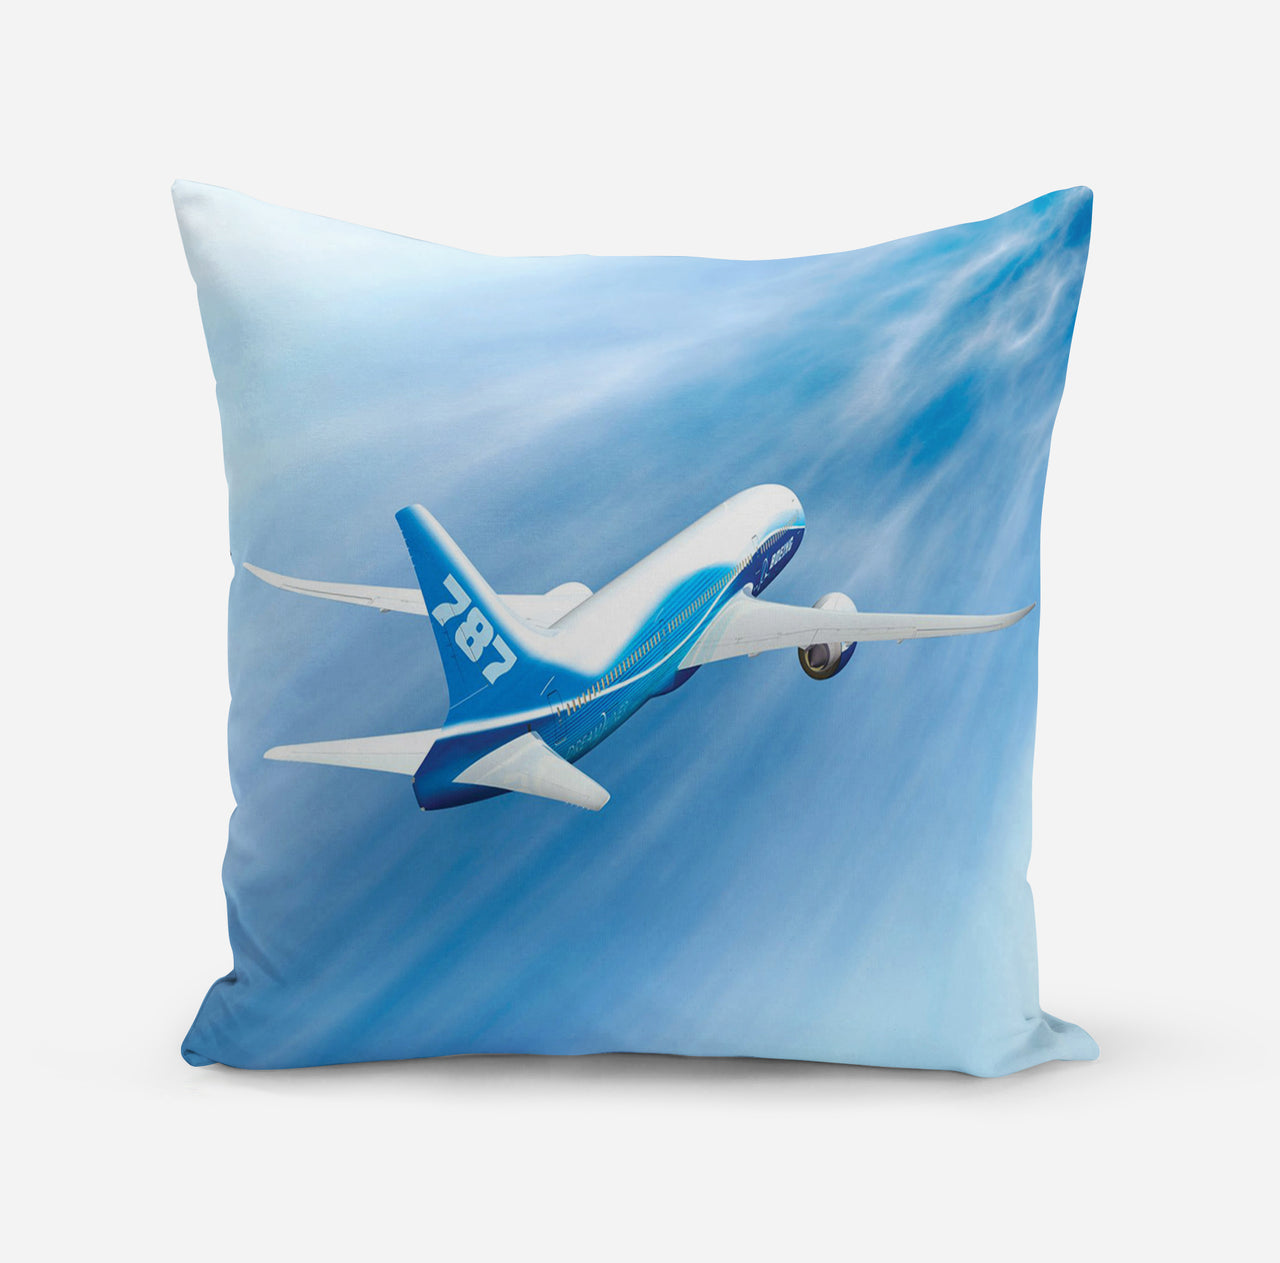 Beautiful Painting of Boeing 787 Dreamliner Designed Pillows